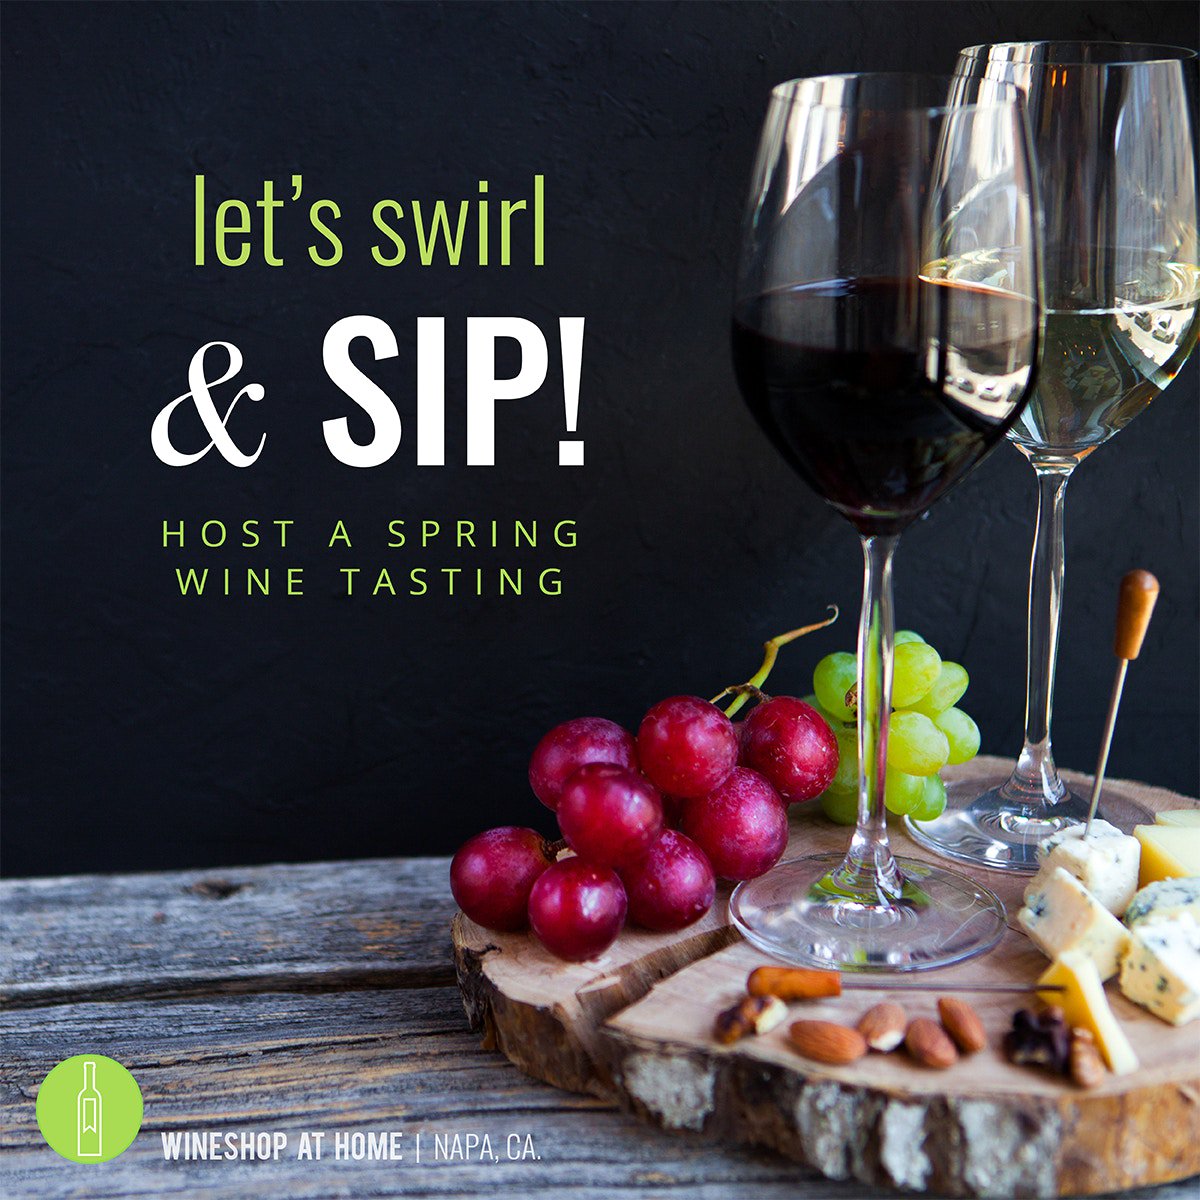 Spring is in the air and it's the perfect time for sipping & swirling! Contact me for available Wine Tasting dates. #winetasting #noheadachewines #napavalleywinery wsah.life/3bt9fr